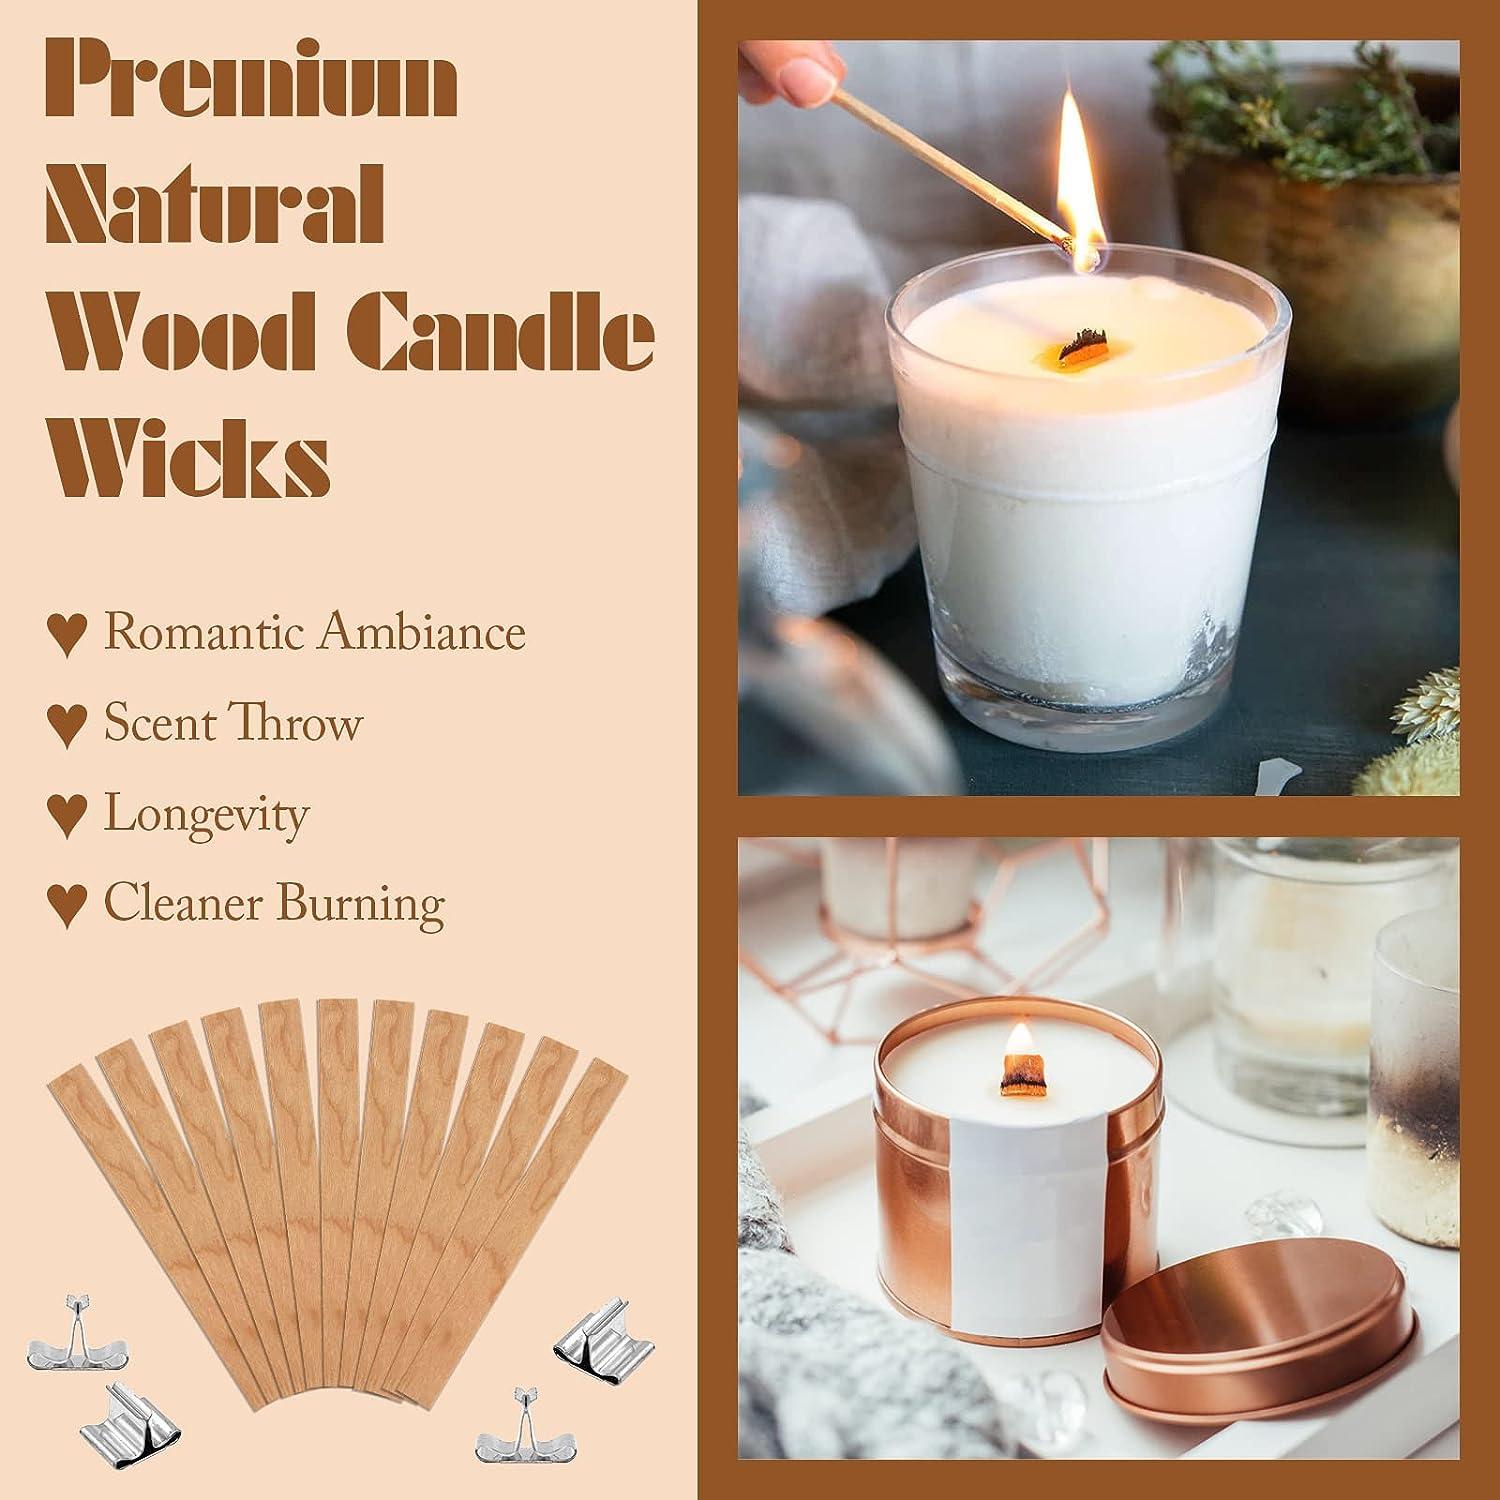 ZYNERY 660 Pcs Wood Candle Wicks Set, 5.1X0.5 Inch Candle Wick with Metal  Base Warning Labels Adhesive, Natural Wooden Wicks for Candle Making  Supplies, Smokeless Wood Wicks for Soy Wax Candle Cores